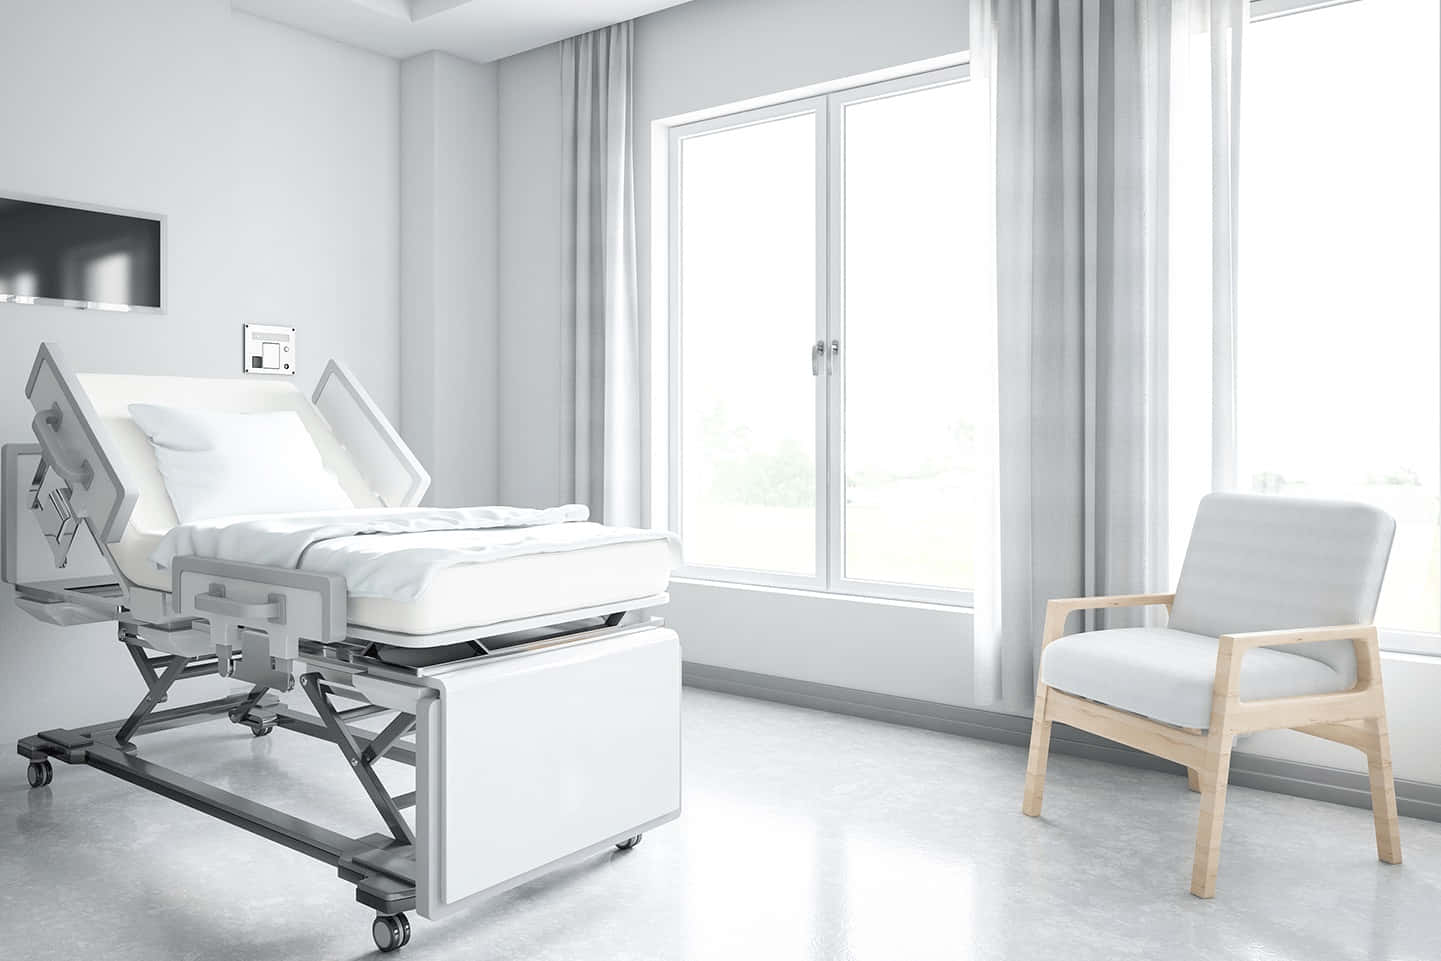 A Hospital Room With A Bed And Chair